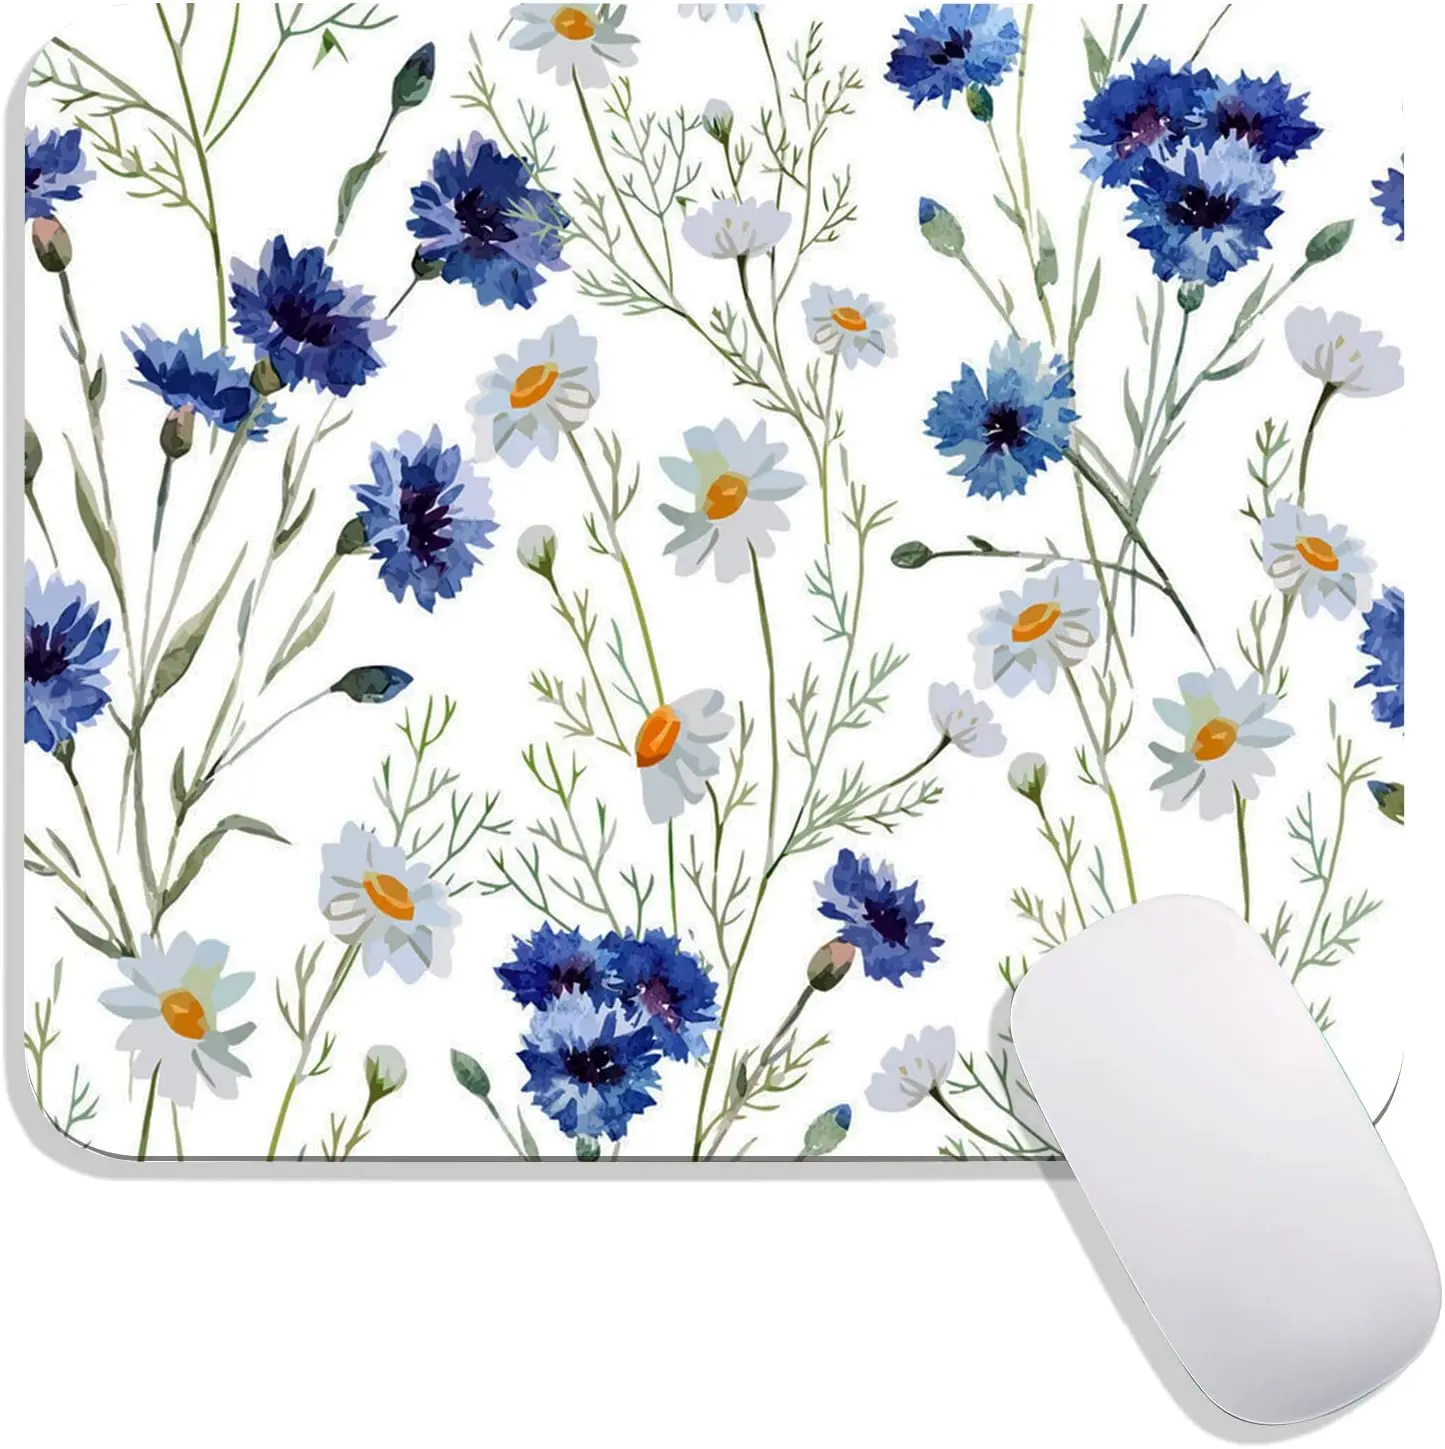 

Pretty Floral Mouse Pad Personalized Premium-Textured Mousepads Design Non-Slip Rubber Base Computer Mouse Pads 9.7x7.9 Inches